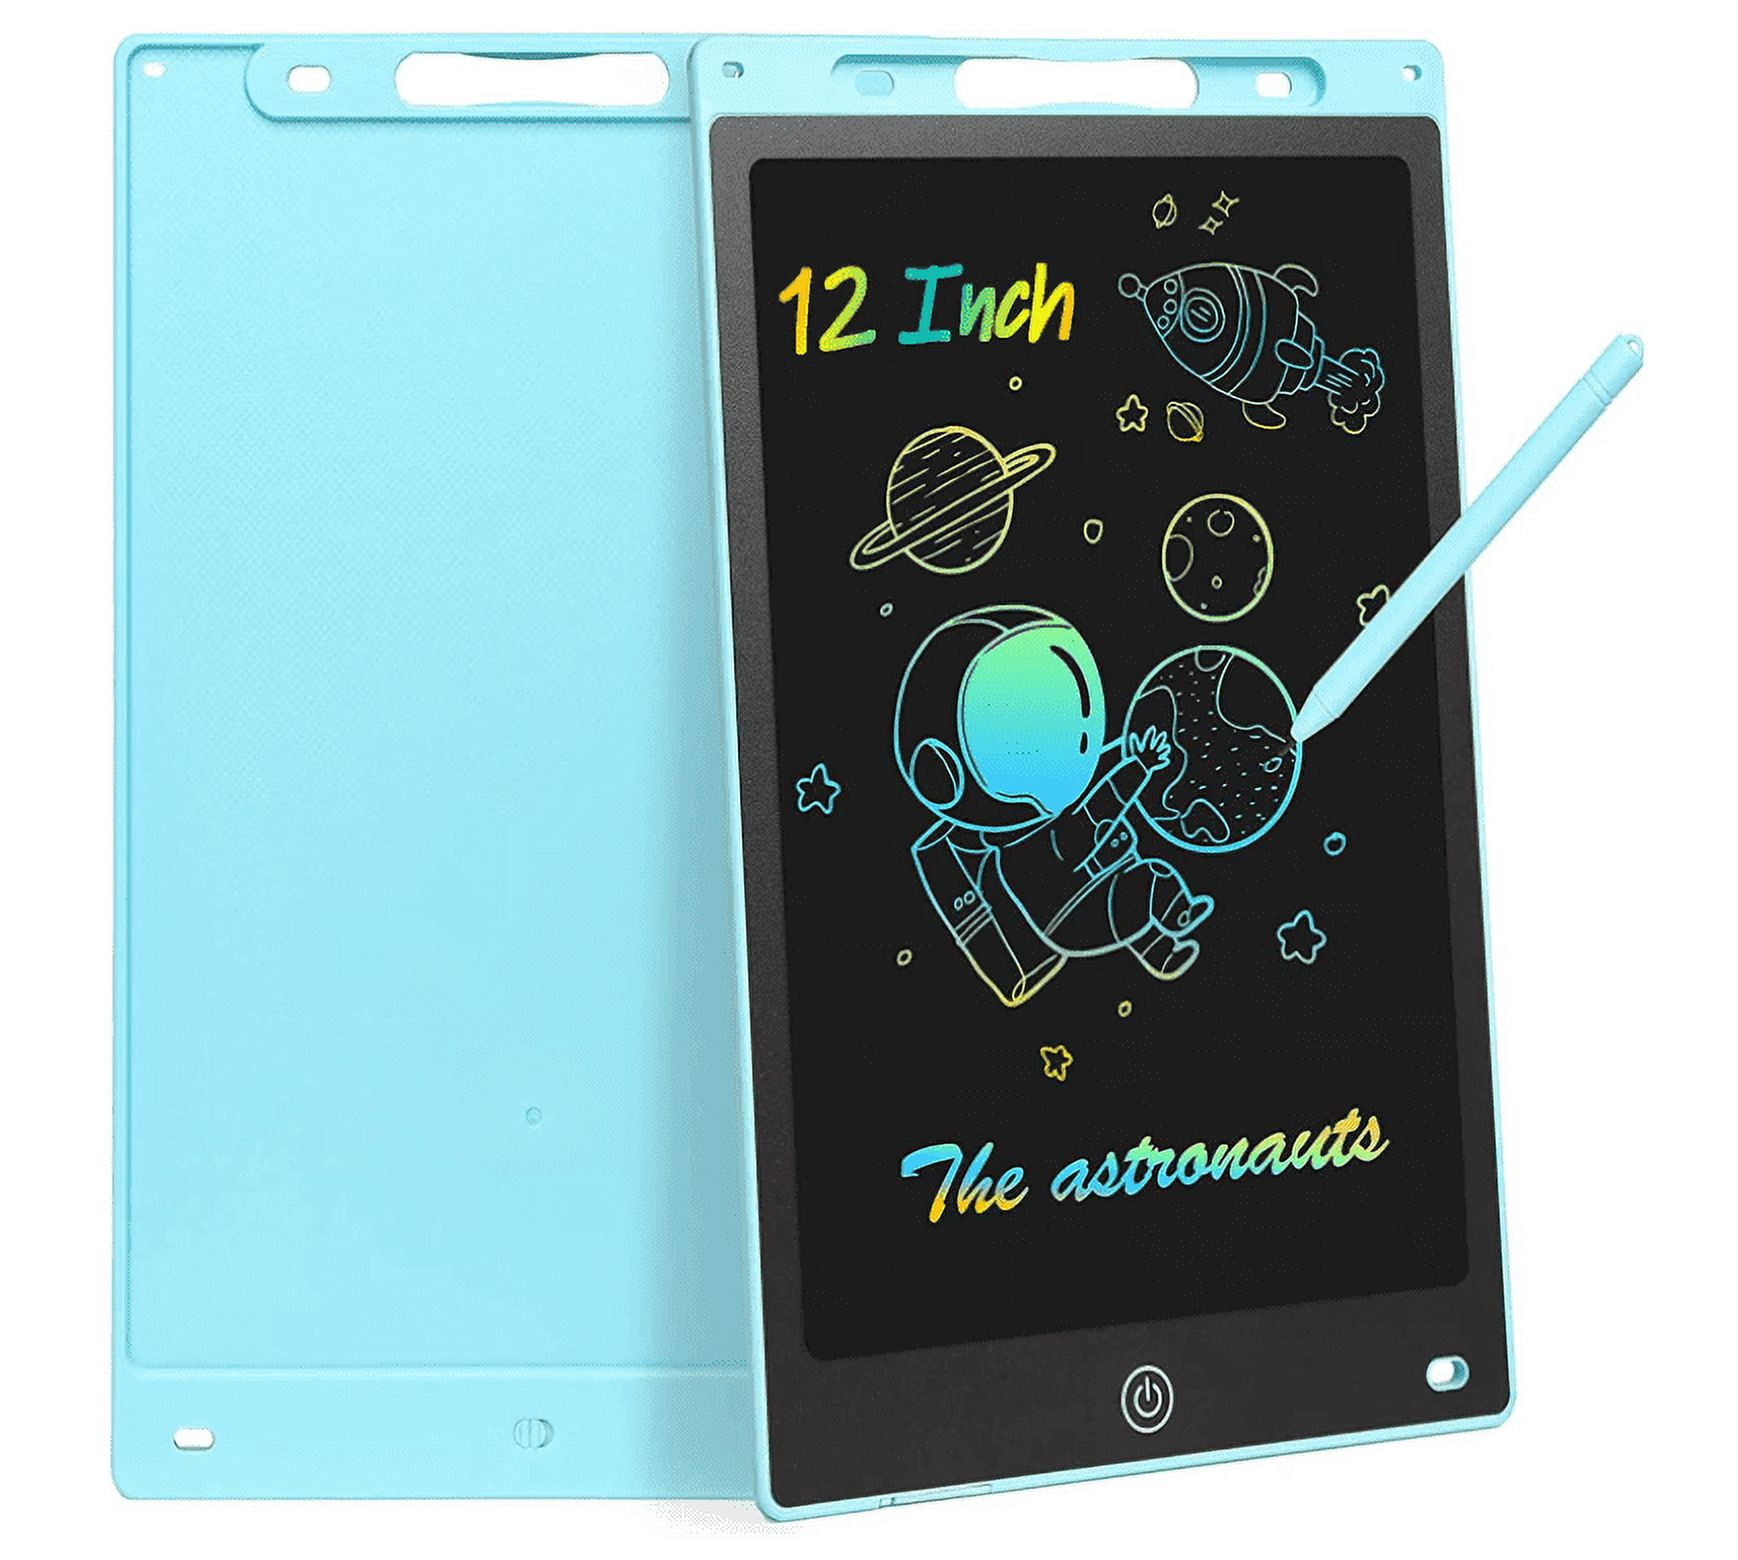 A4/A5 Electronic painting LED Drawing Board Coloring Doodle Painting  Digital Tablet Drawing Board For Kids Toys Birthday Gift